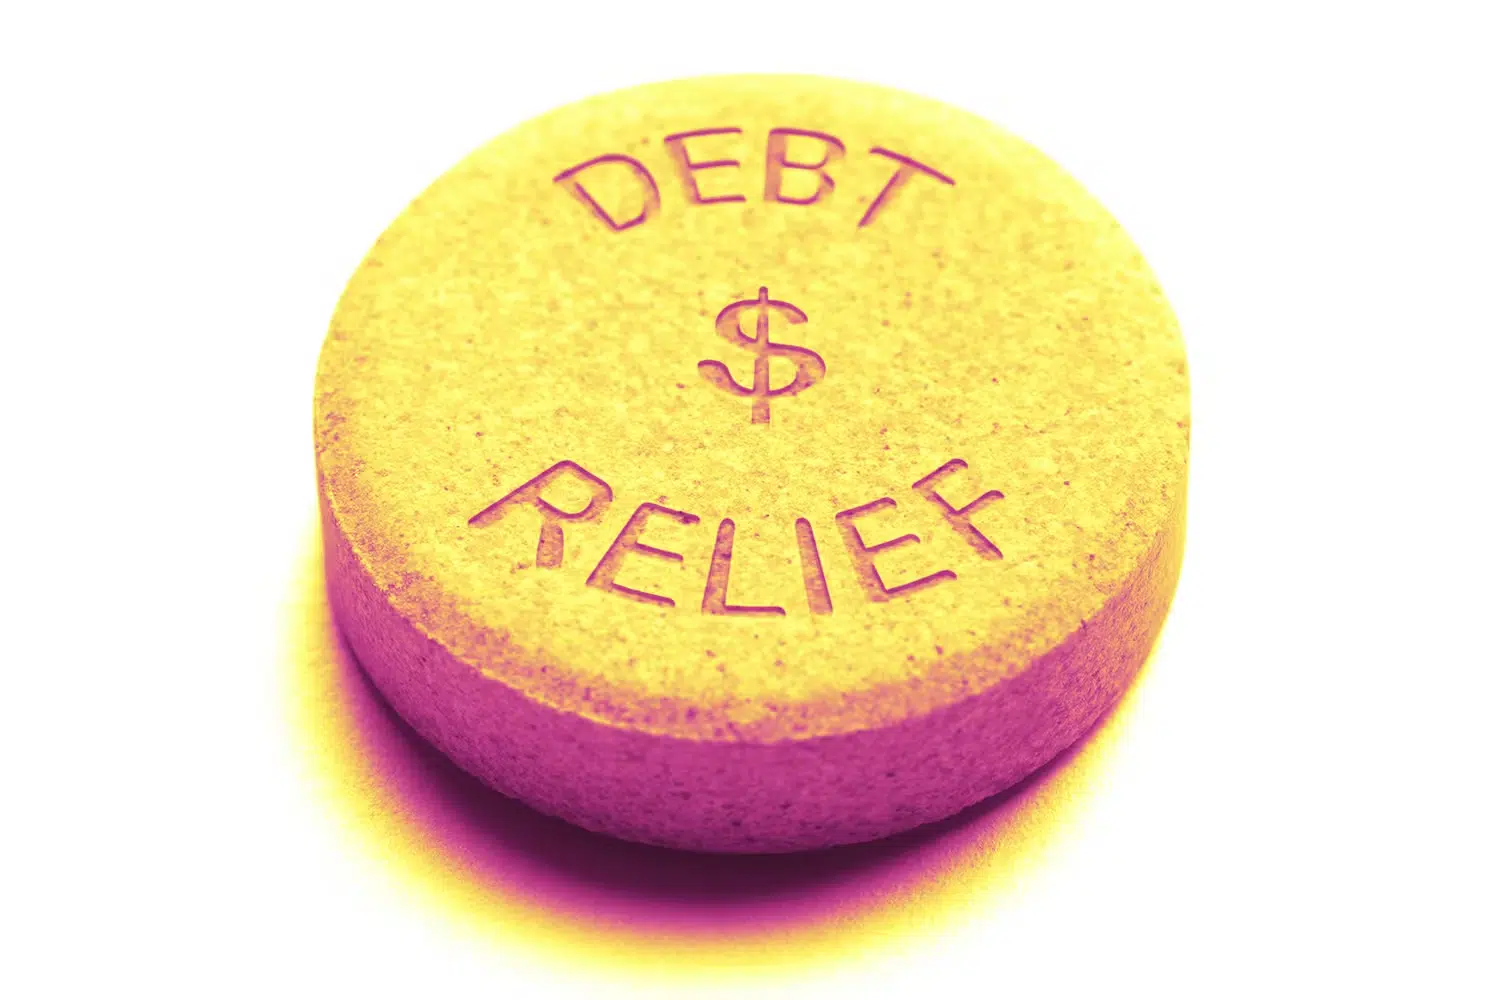 Pressed pill that says "DEBT RELIEF"